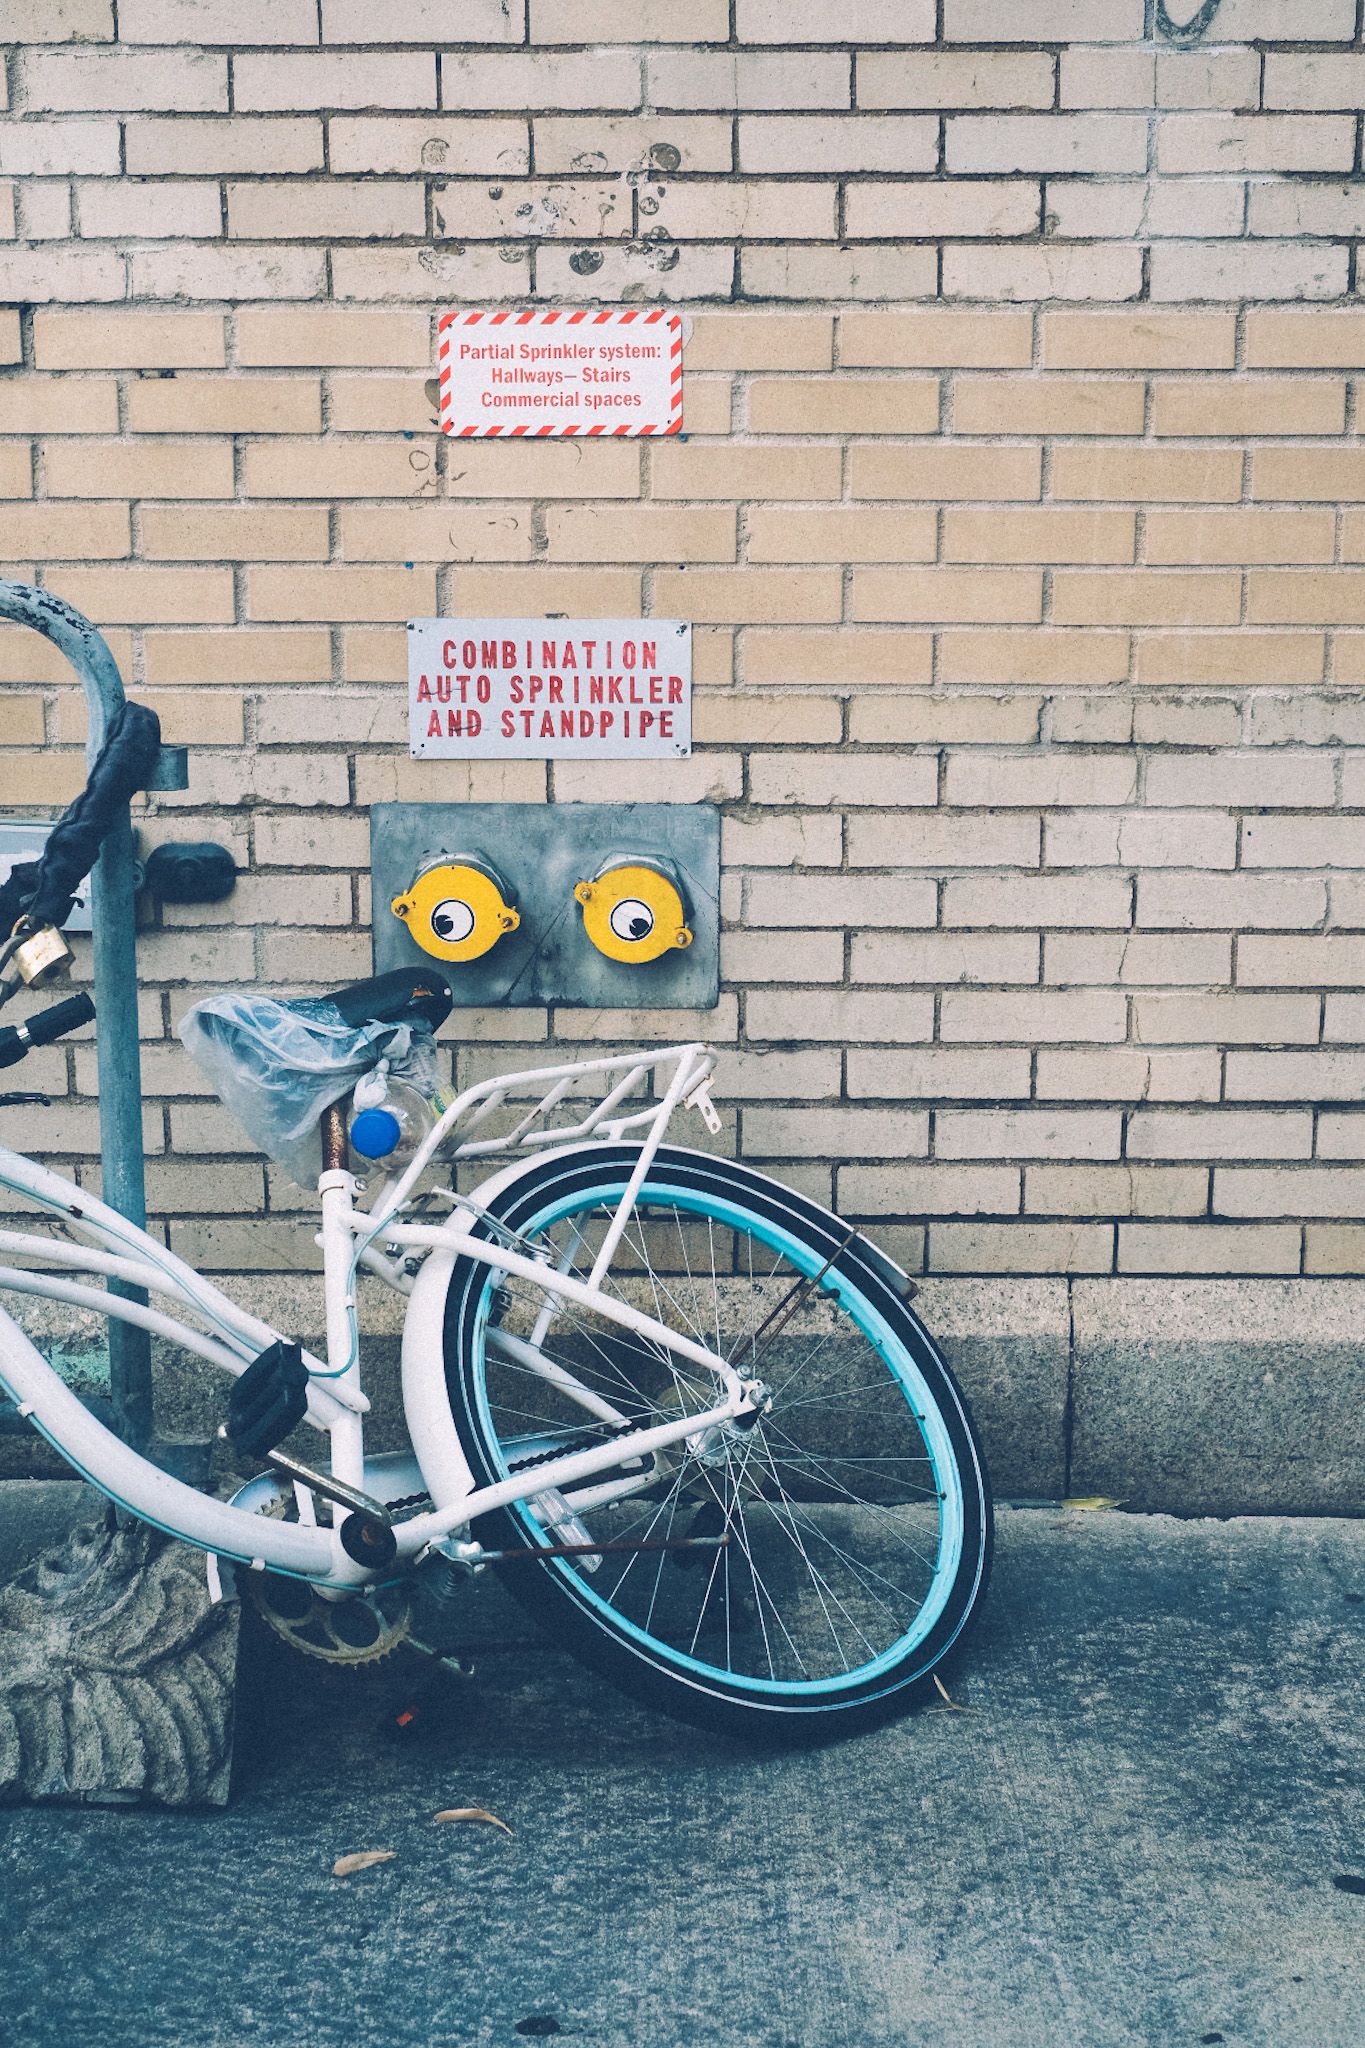 A white bike leans against an off-white brick wall, in front of a sprinkler hookup with googly eyes on it.